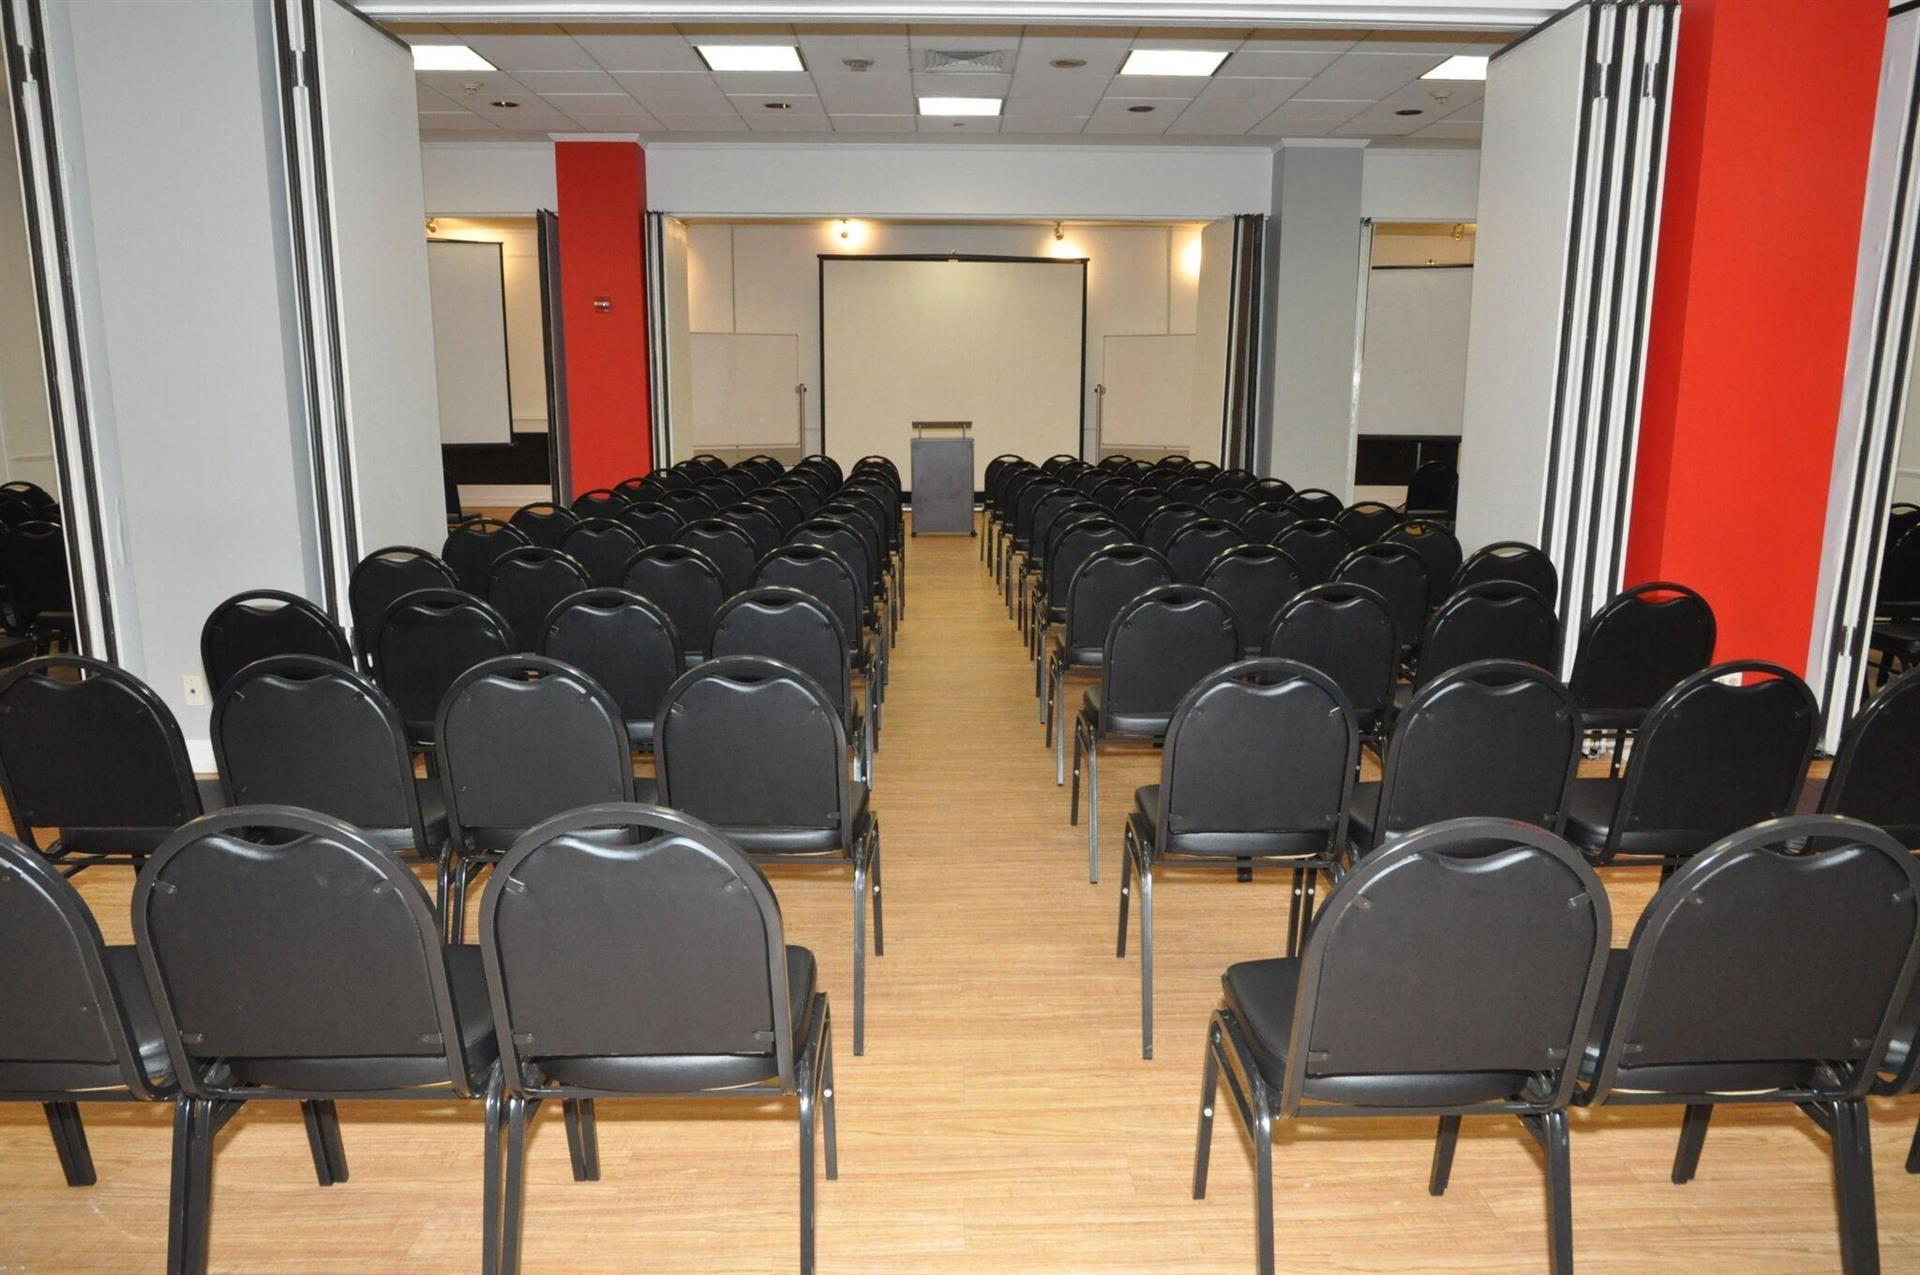 NYC Seminar and Conference Center in New York, NY